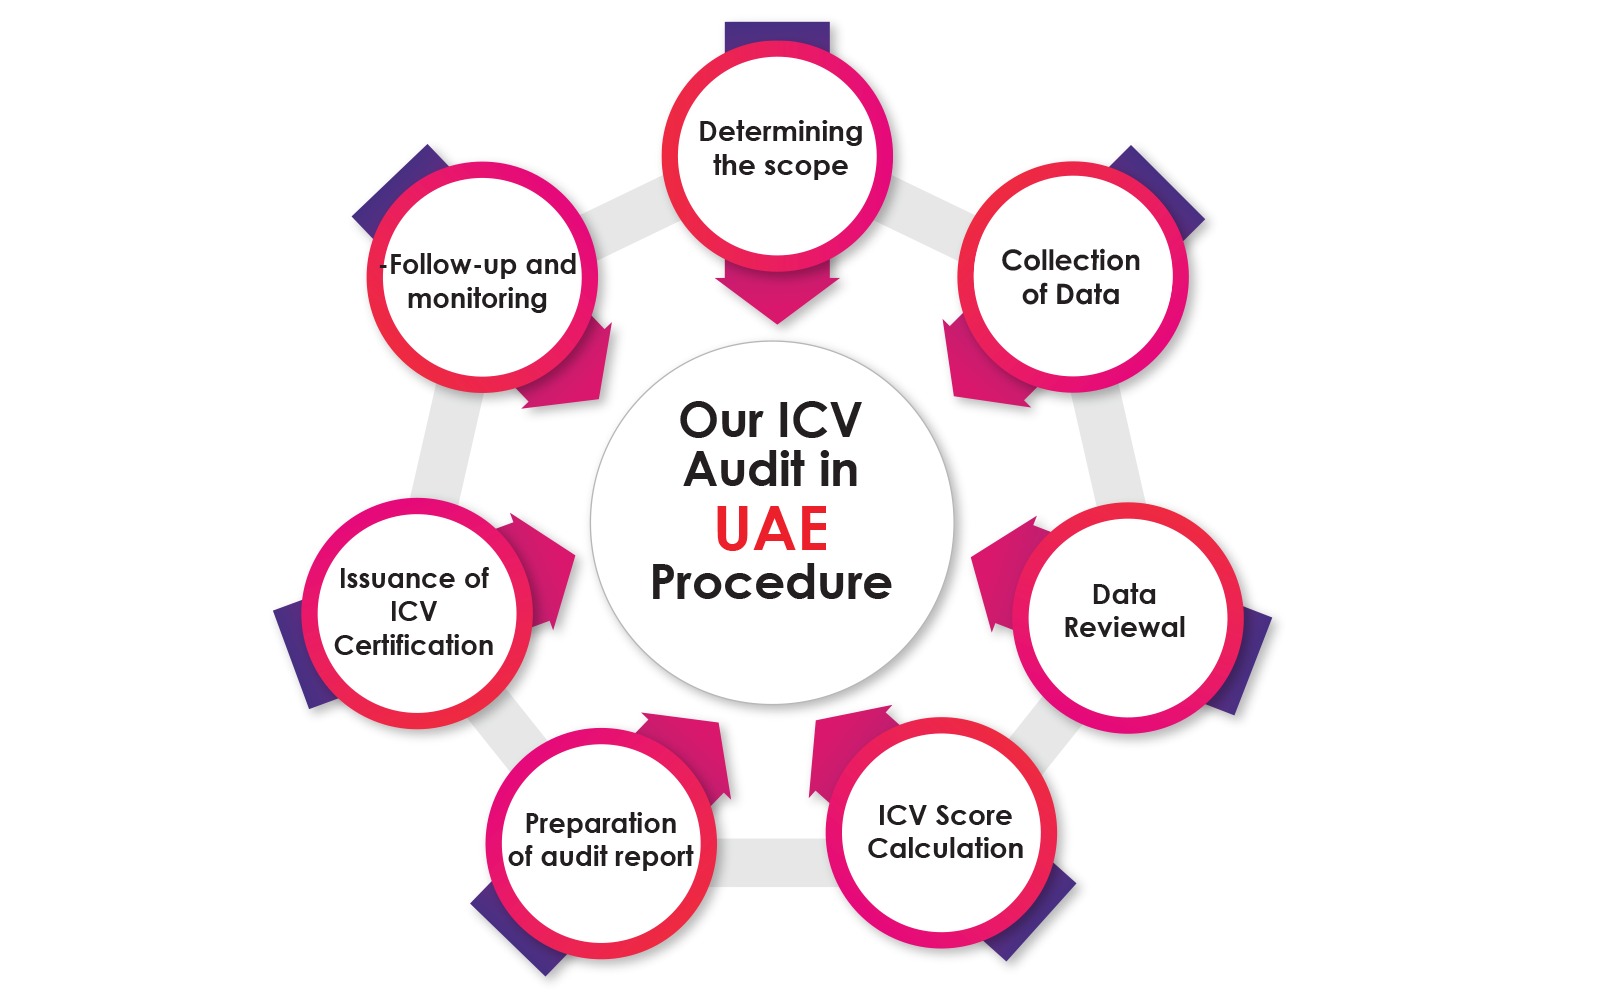 ICV Audit Procedure includes The ICV (In-Country Value) Audit process in UAE is a formal review conducted by a certified ICV auditor to determine a company's compliance with the ICV Program requirements. The process involves determining the scope of the audit, collecting relevant data, reviewing the data, calculating the ICV score, preparing an audit report, and issuing ICV Certification. 